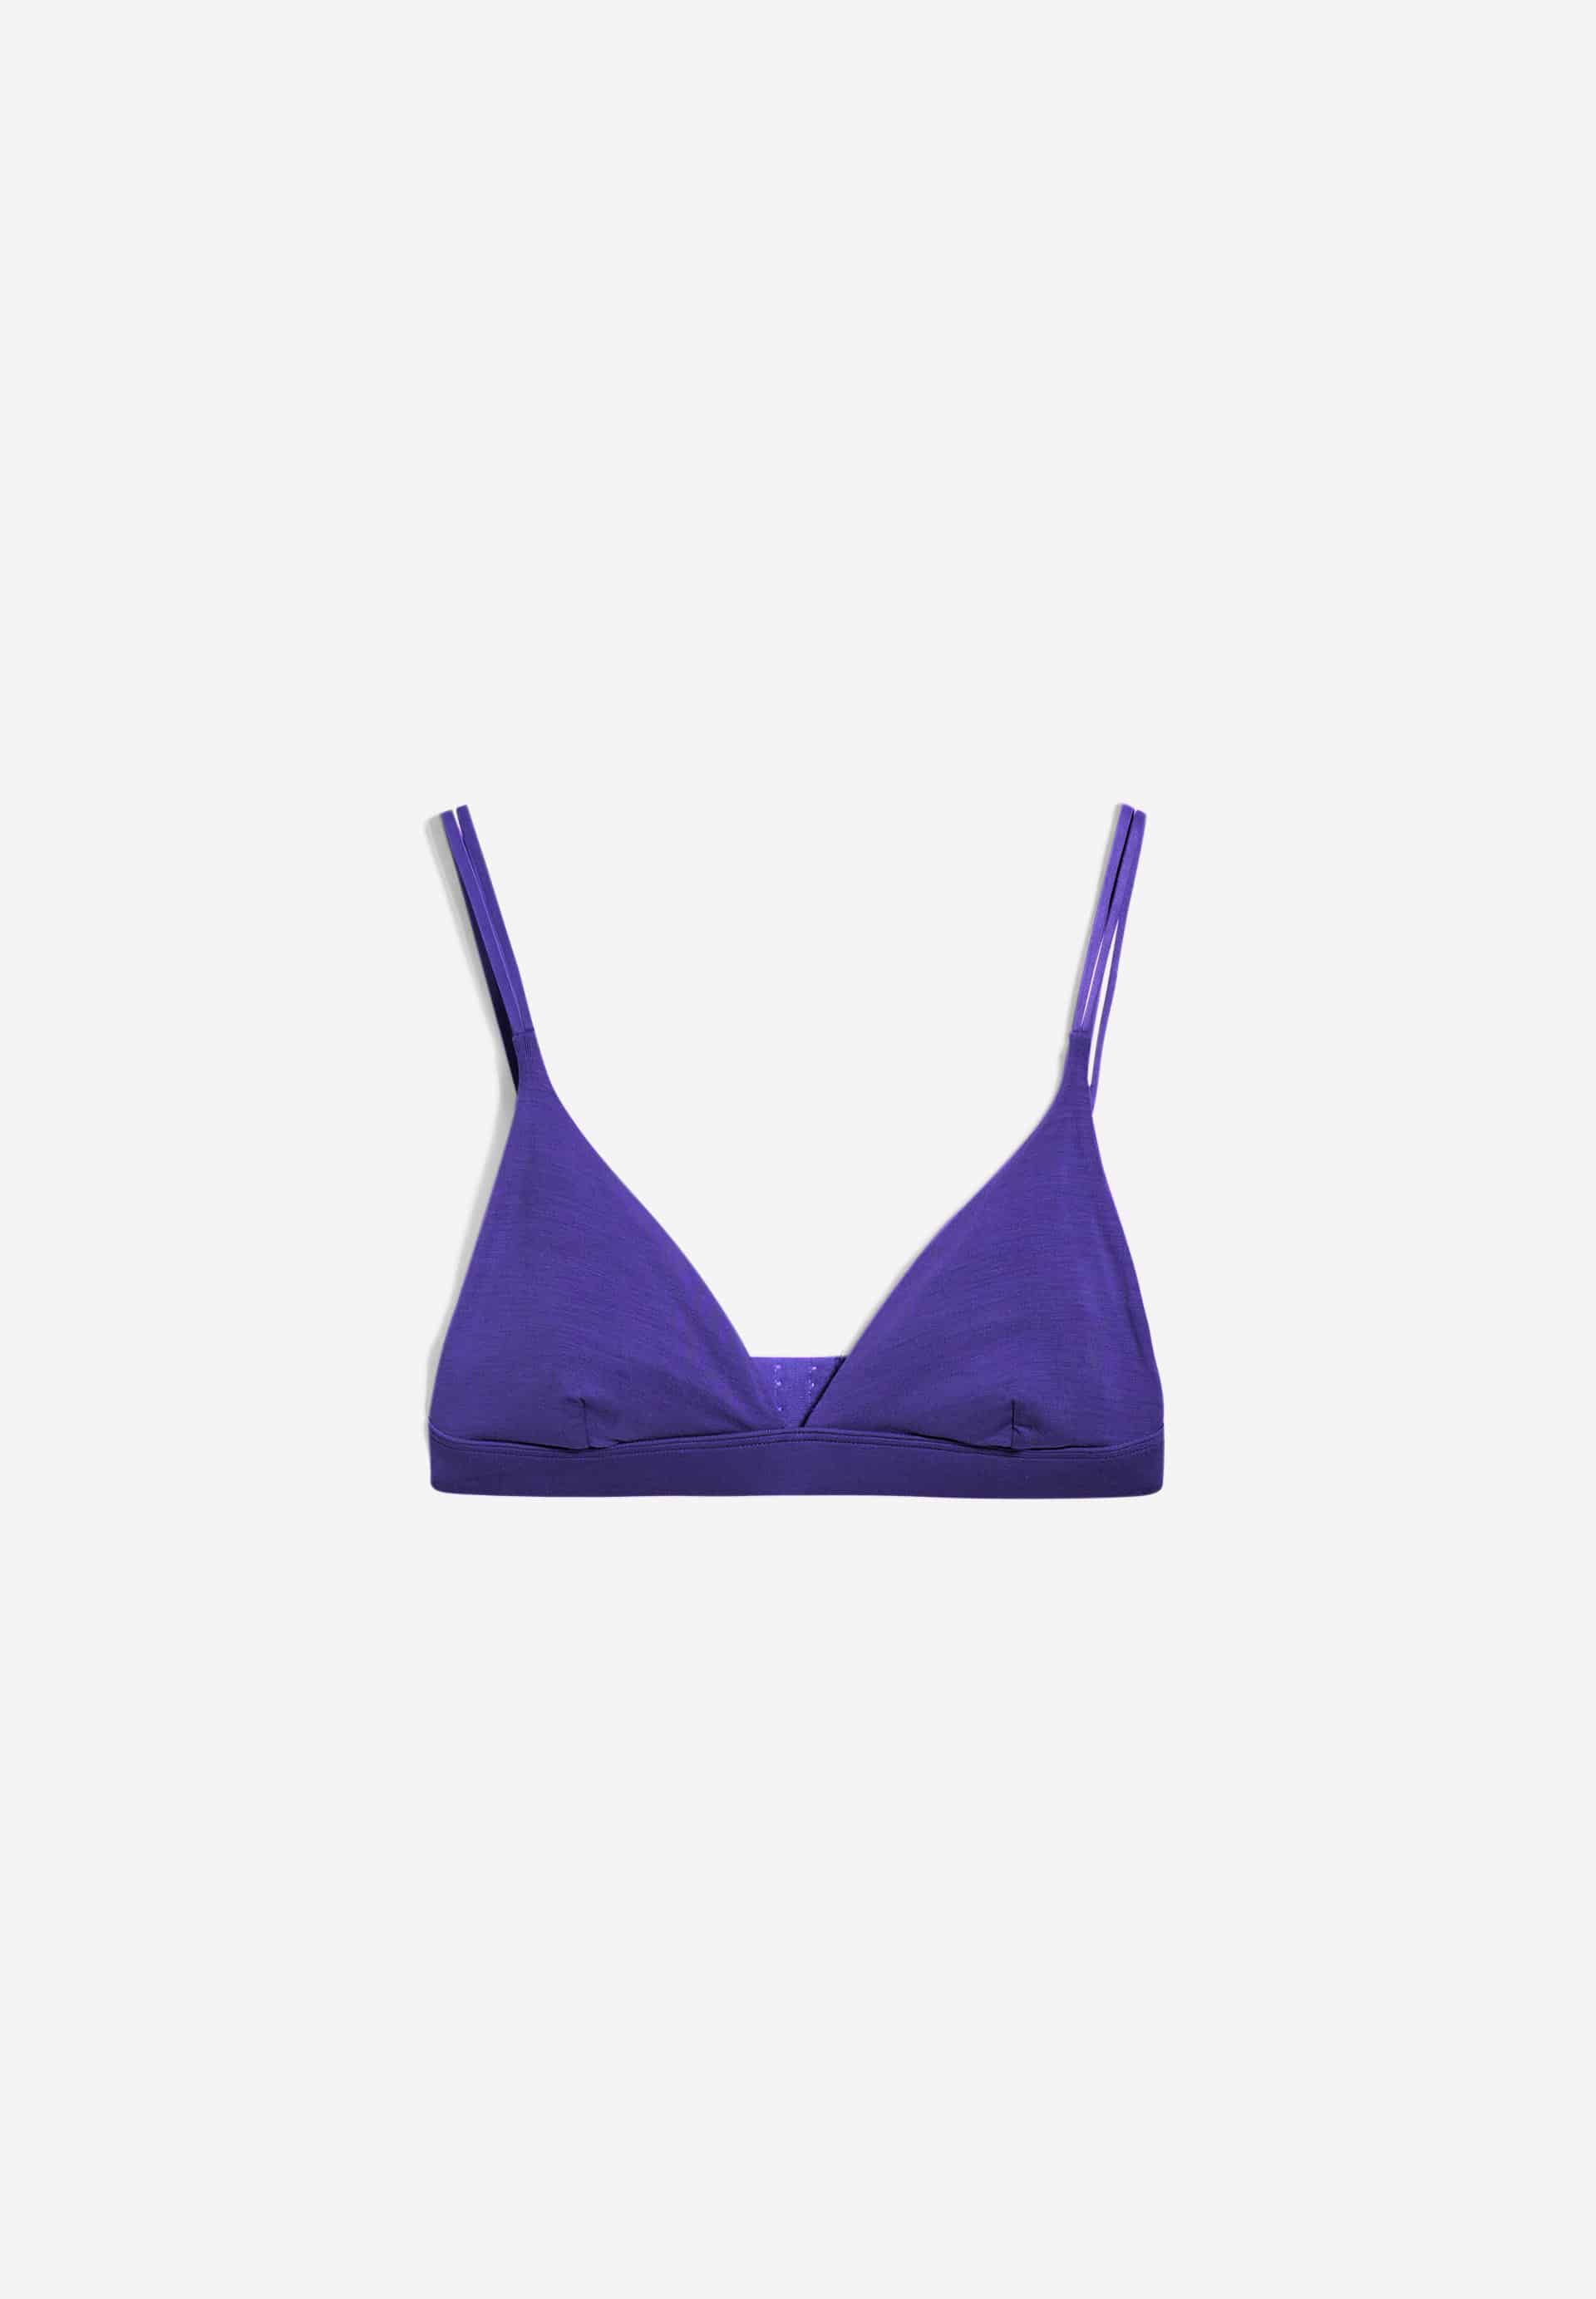 OSAAM Triangle Bralette made of TENCEL™ Modal Mix